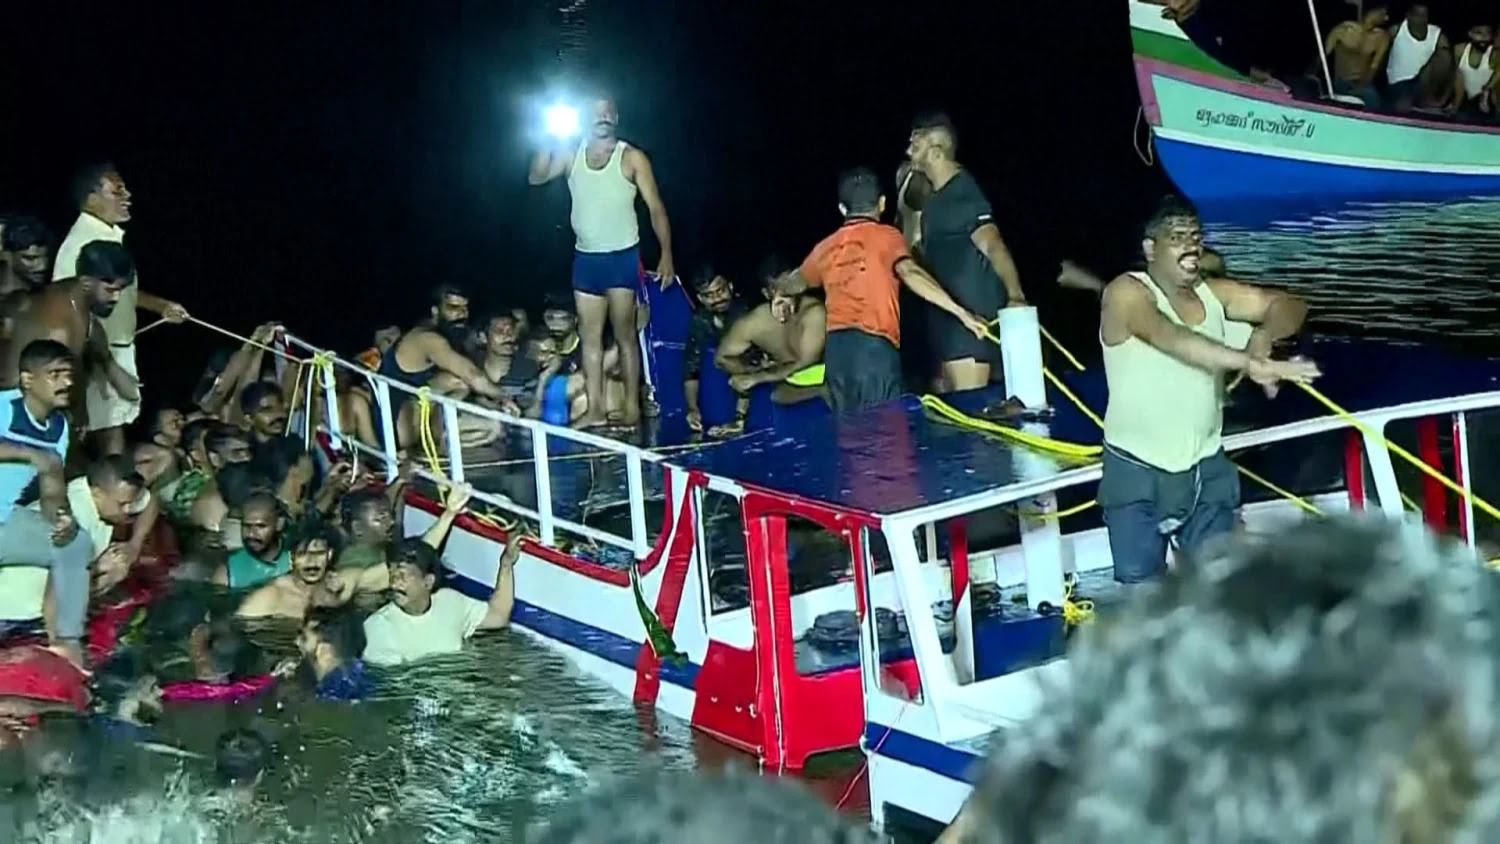 Overloaded Tourist Boat Capsizes in India Leaving 22 Dead